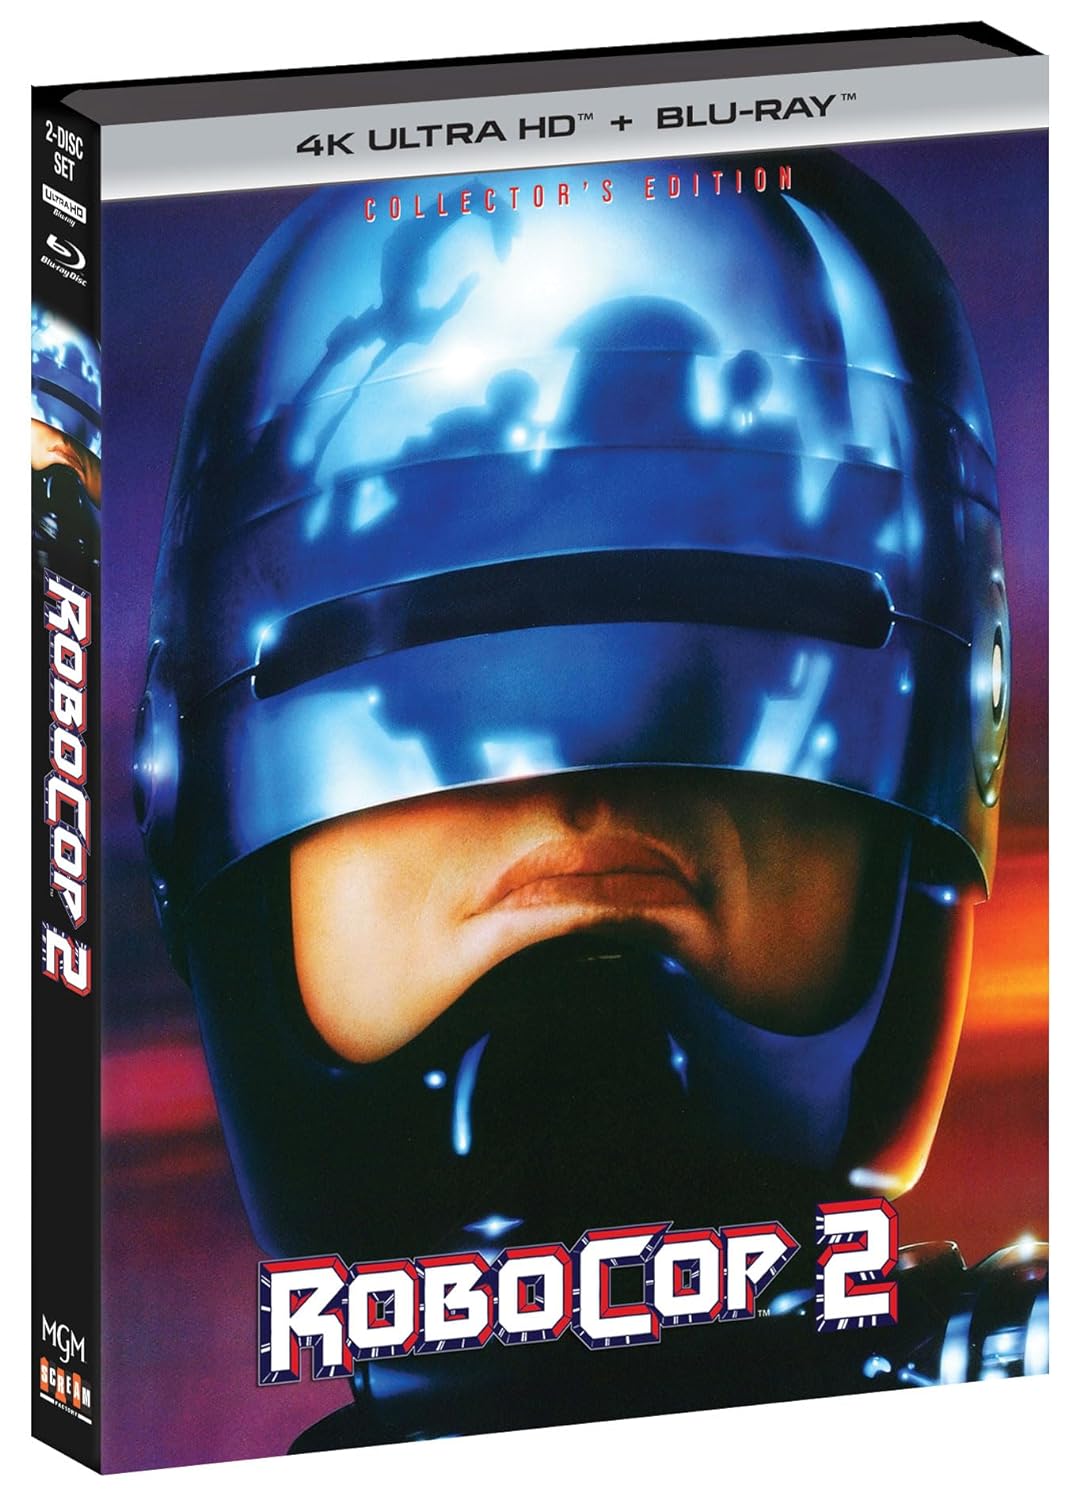 RoboCop 2 (1990): Collector's Edition 4K UHD + Blu-ray with 